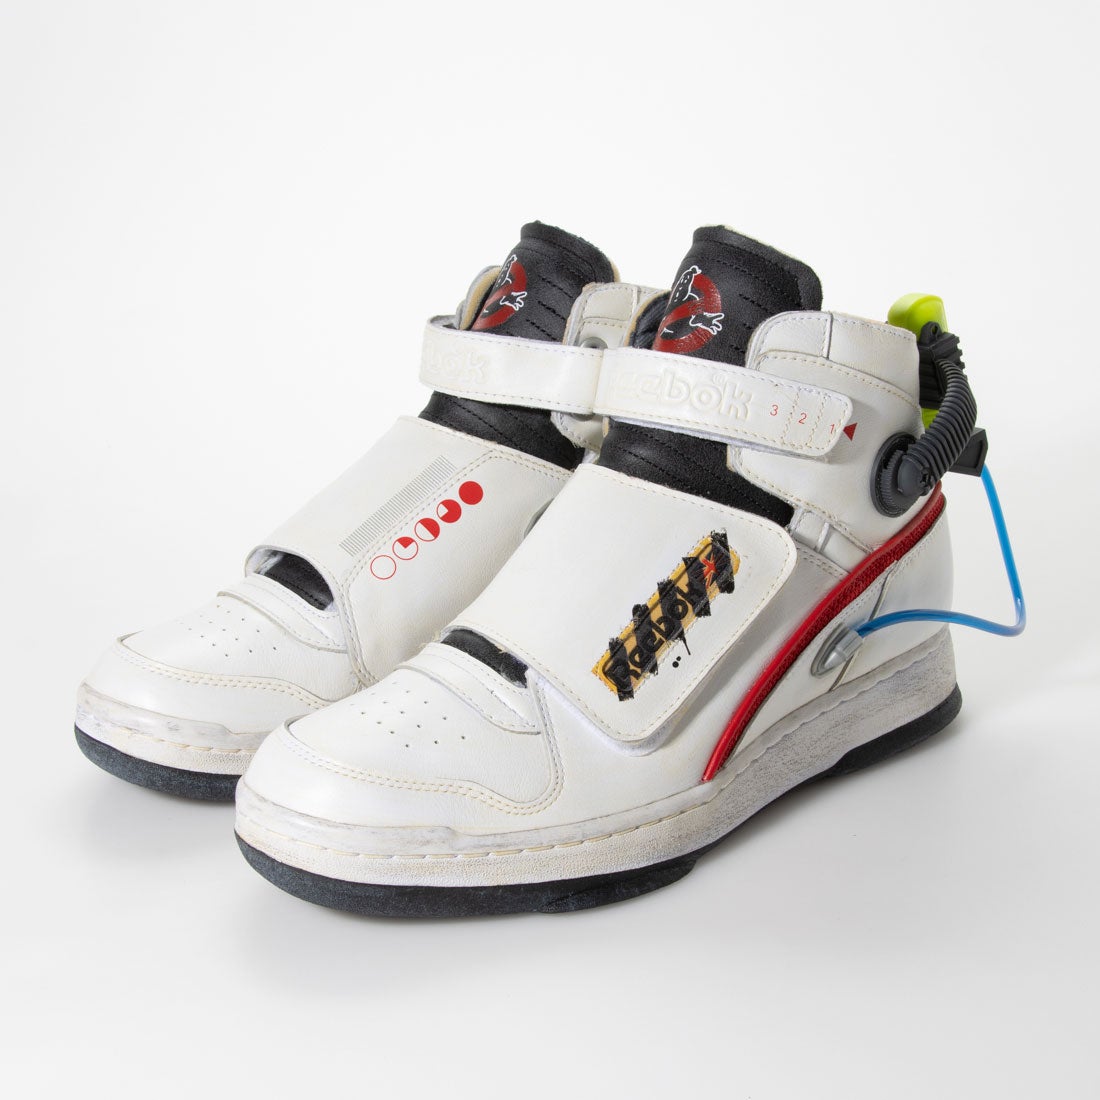 【Reebok CLASSIC x Ghostbusters】ゴーストバスターズ ゴースト スマッシャーズ S / Ghostbusters Ghost Smashers S （ホワイト）